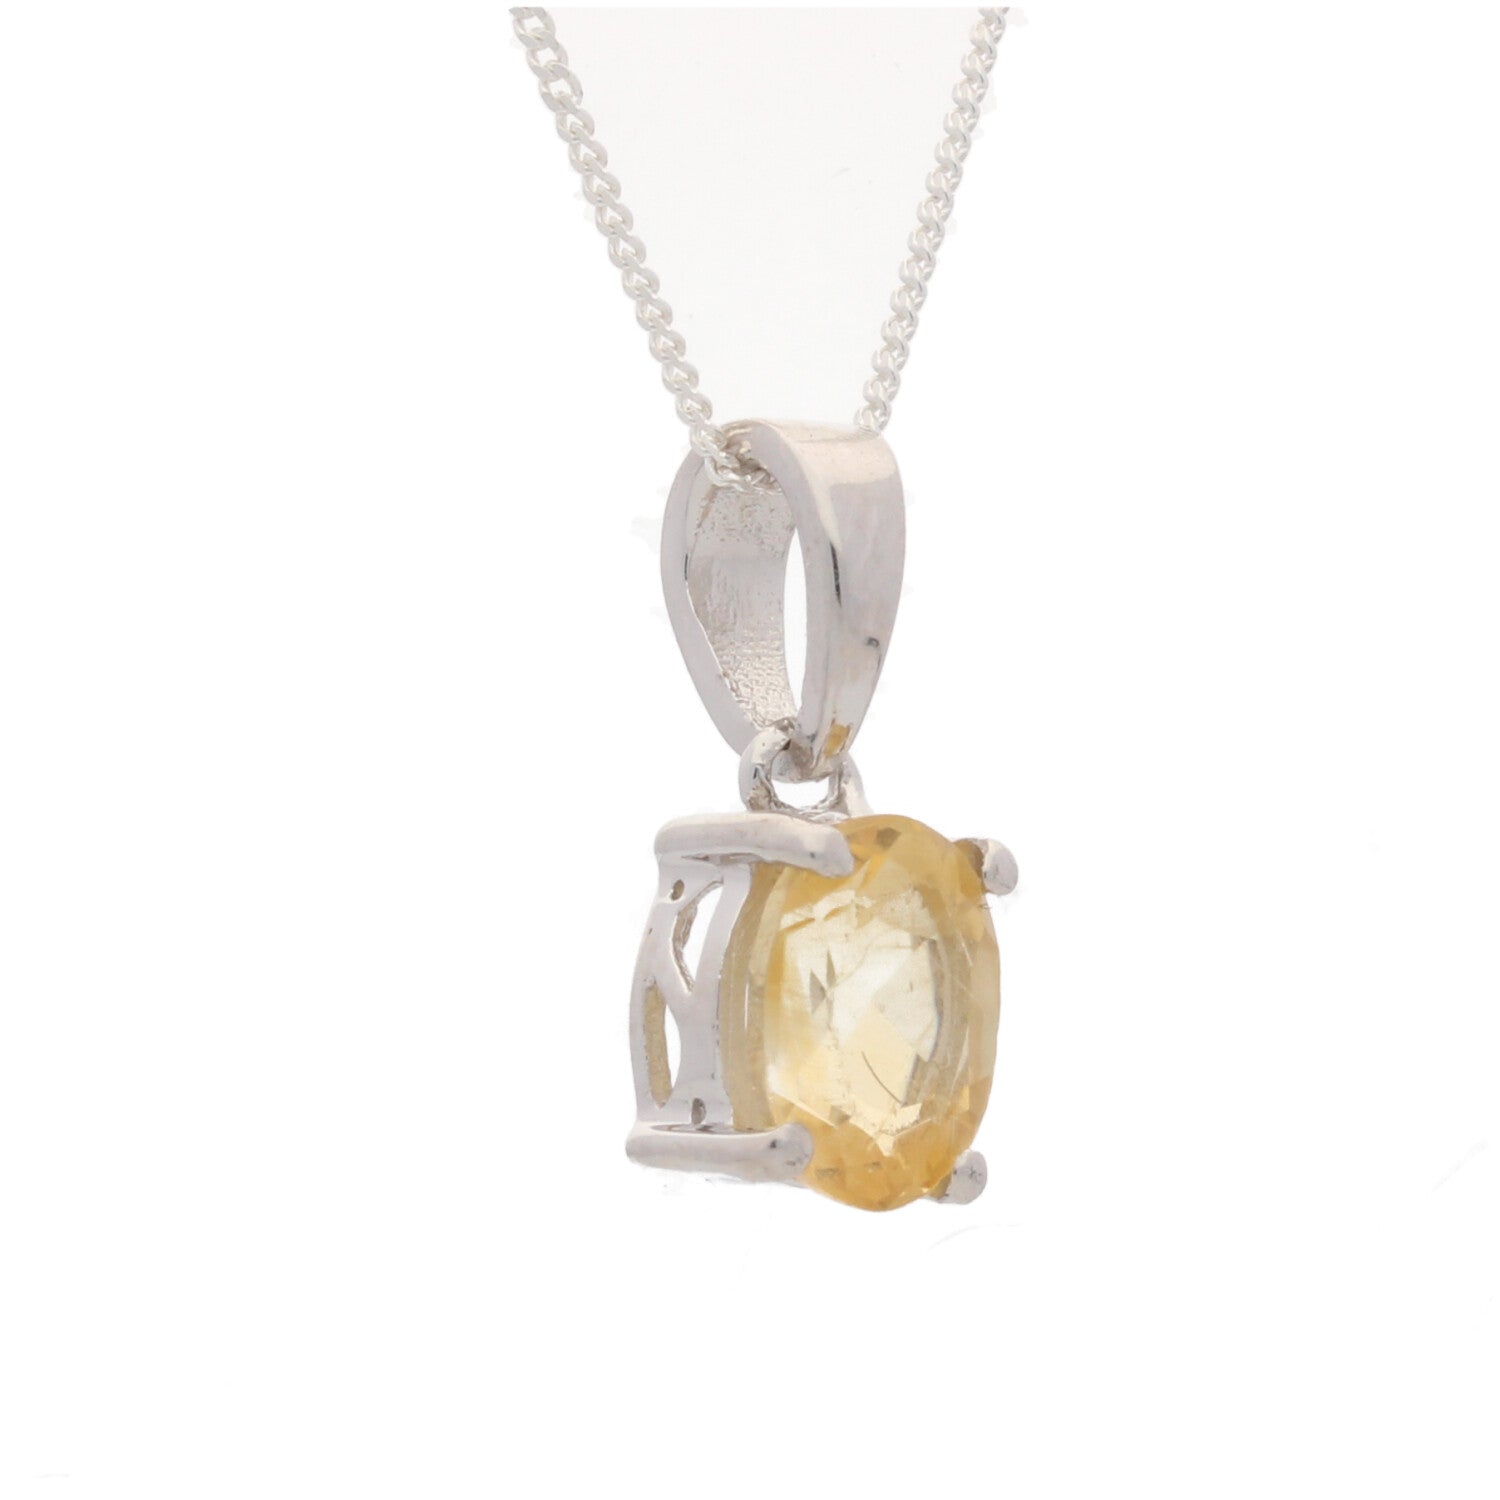 Buy your Faceted Citrine Birthstone Necklace online now or in store at Forever Gems in Franschhoek, South Africa